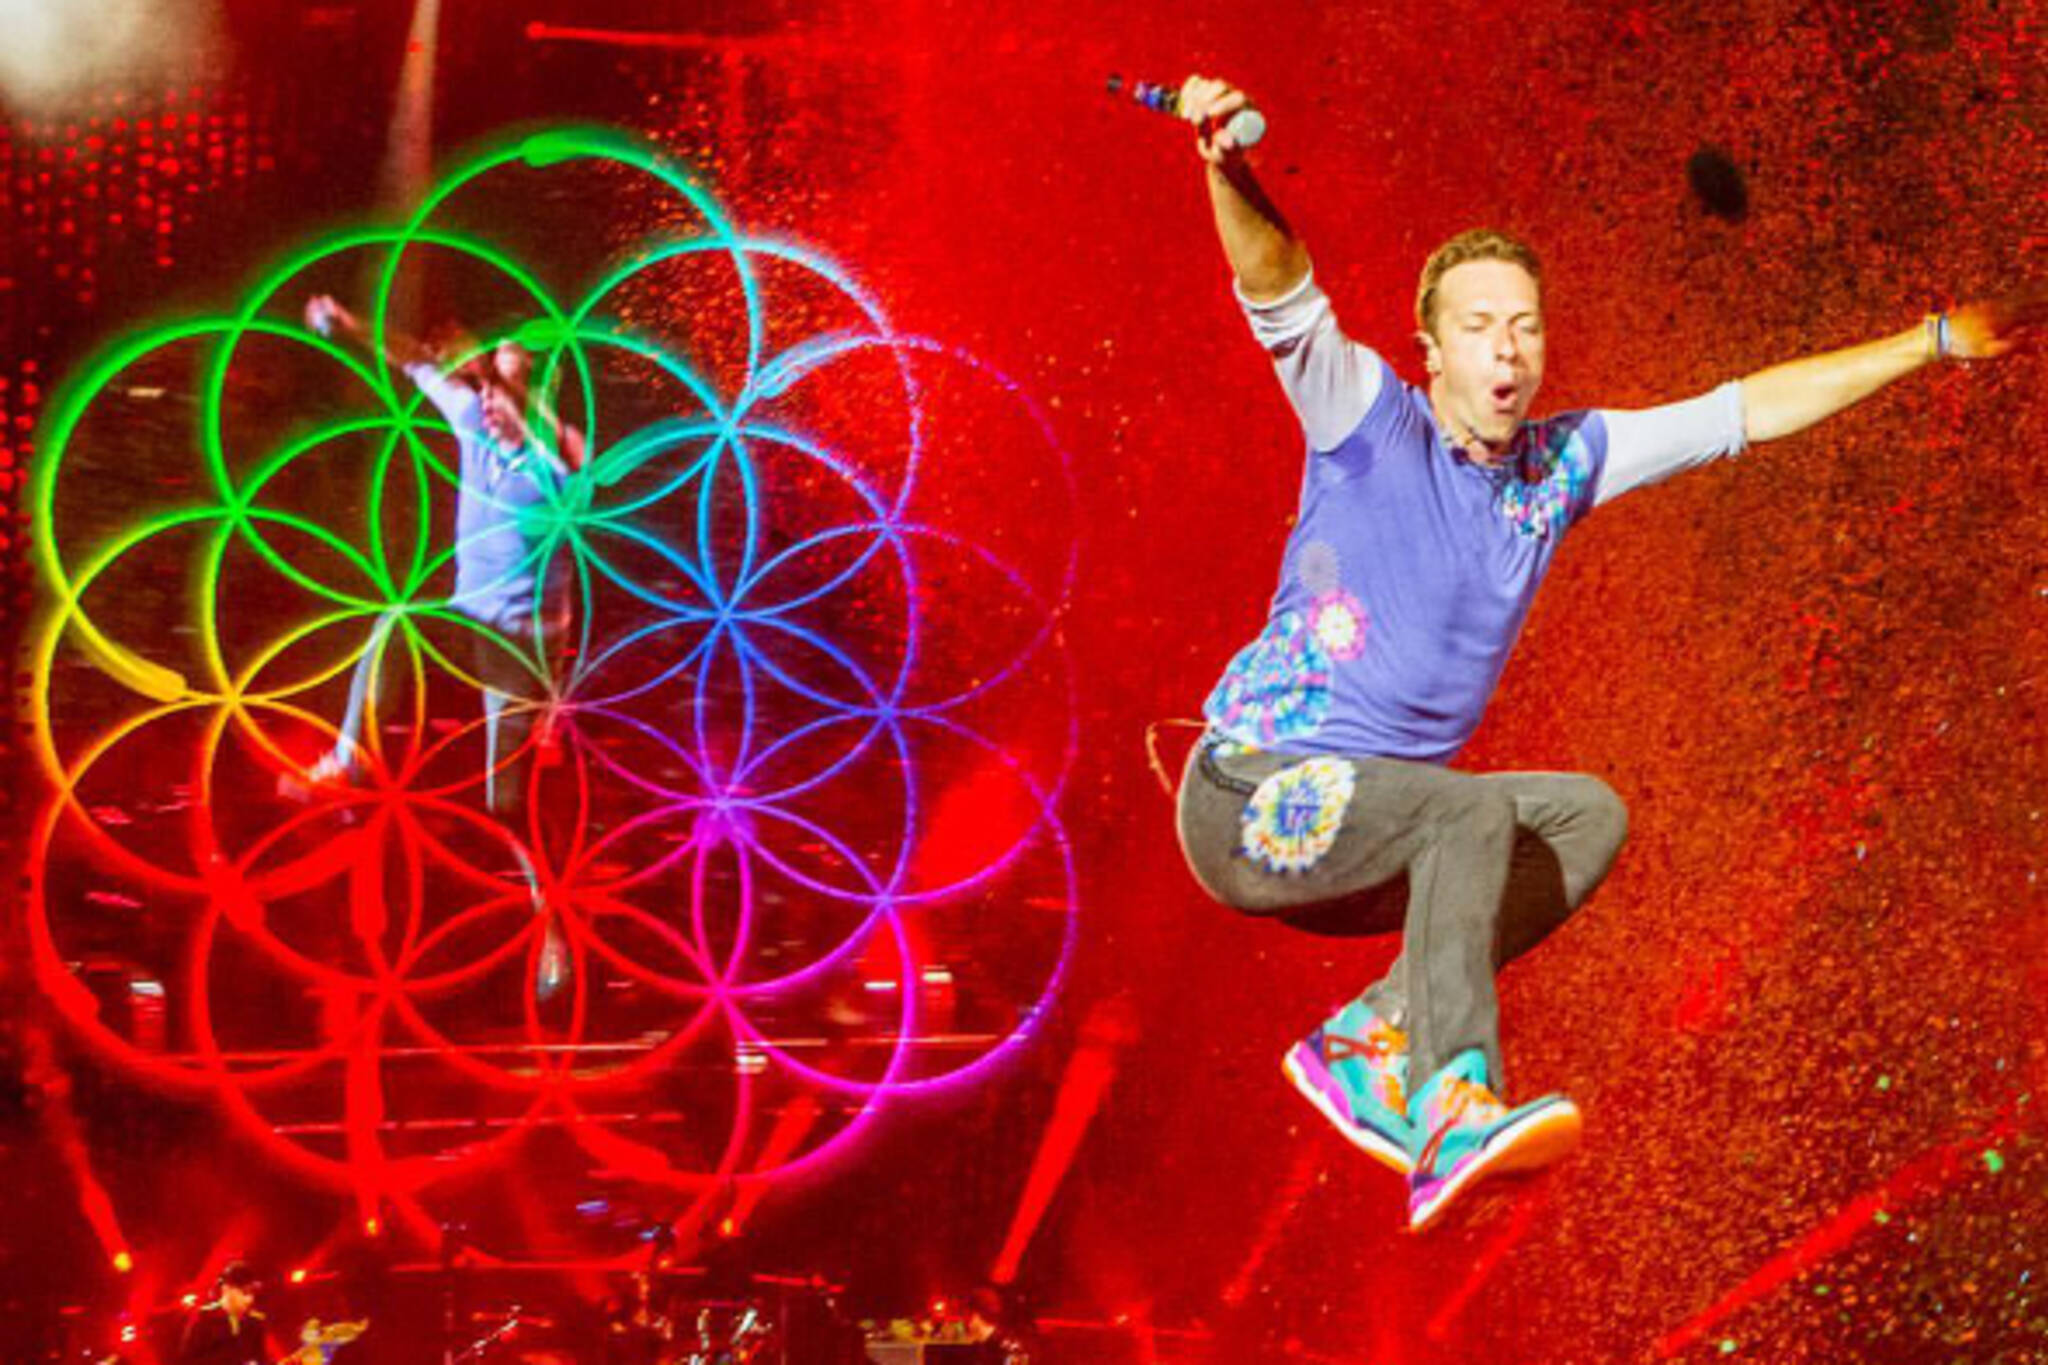 Coldplay is coming to Toronto next year